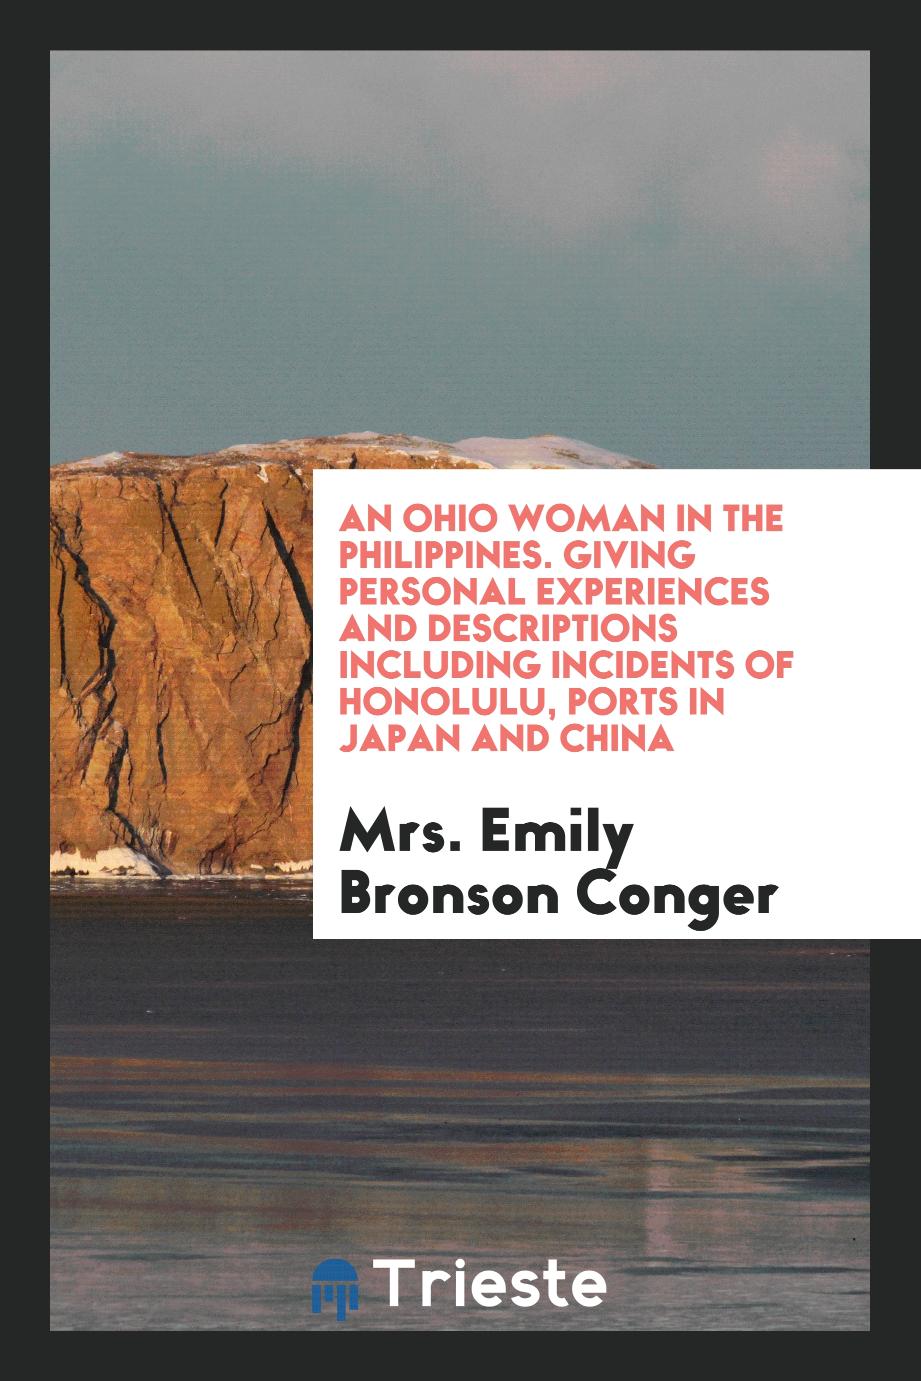 An Ohio woman in the Philippines. Giving personal experiences and descriptions including incidents of Honolulu, ports in Japan and China